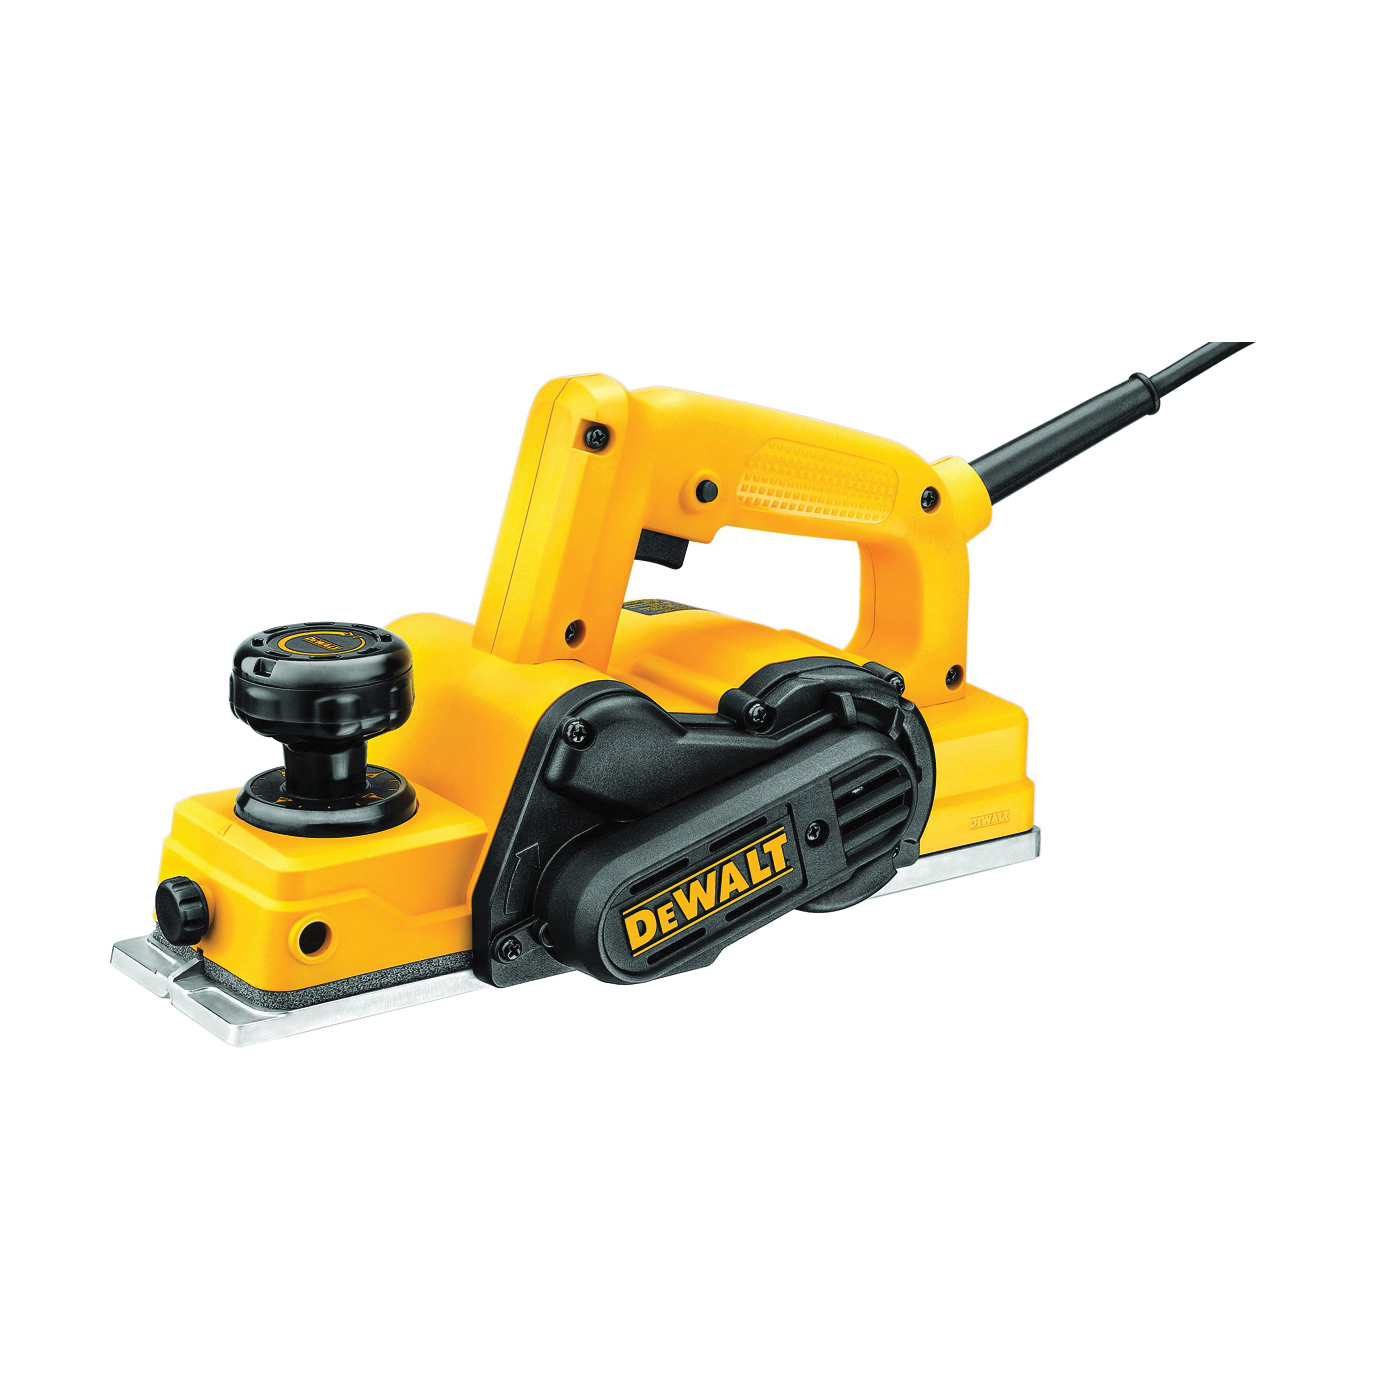 D26676 Hand Planer, 5.5 A, 3-1/4 in Blade, 3-1/4 in W Planning, 1/16 in D Planning, Trigger Switch Control